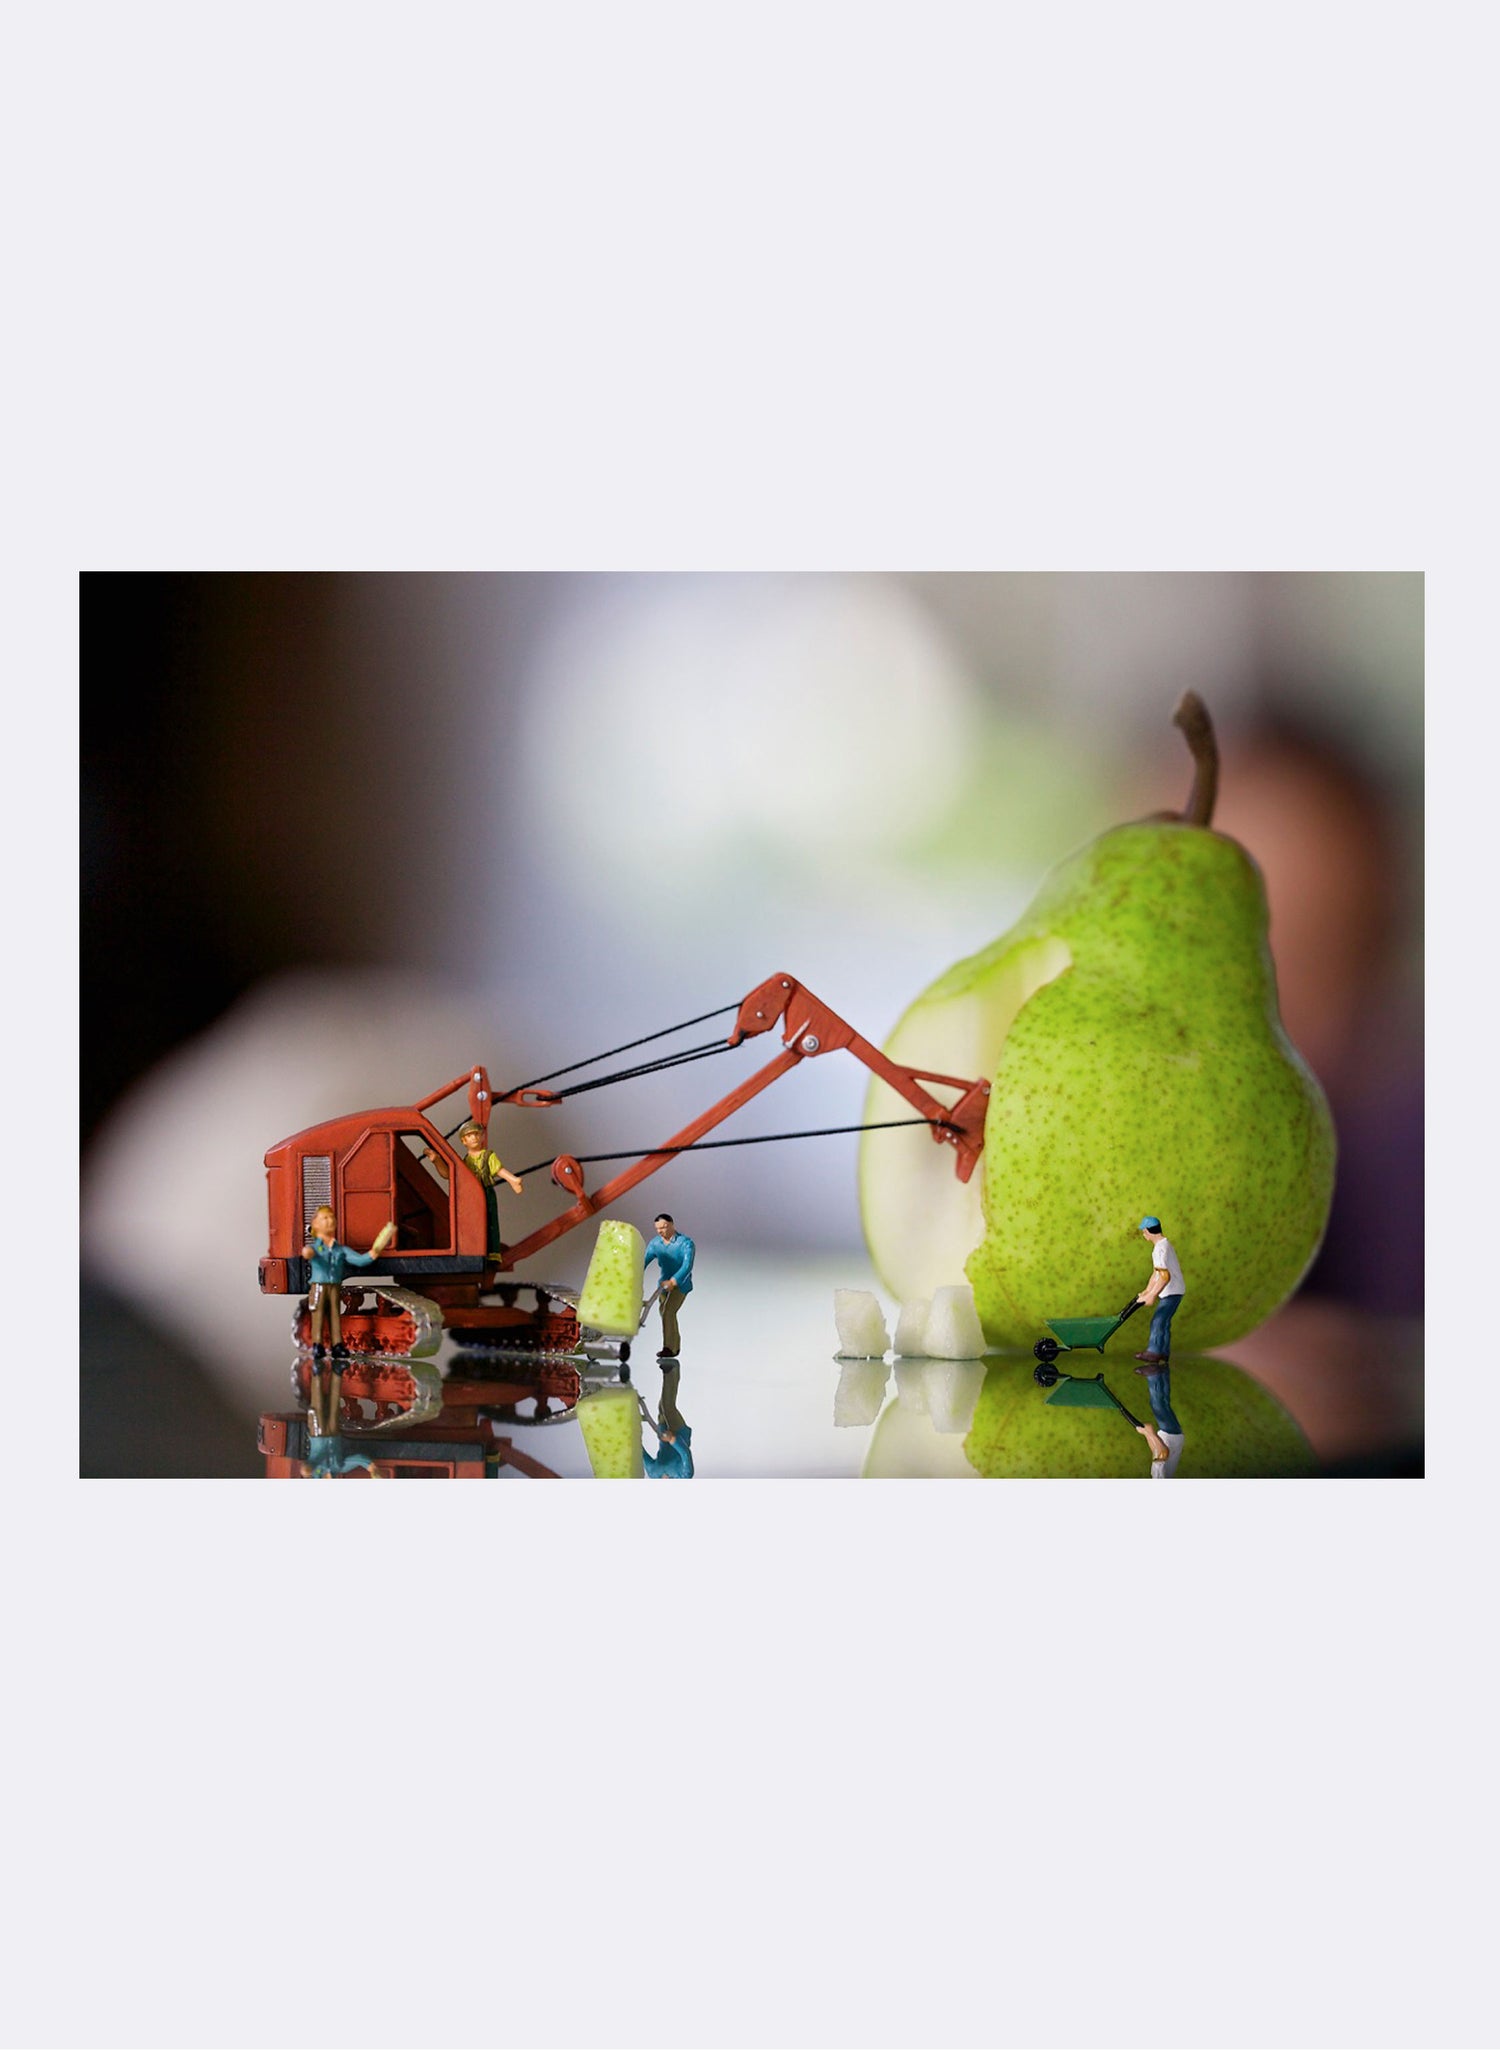 Pear &amp; A Small Team Of Experts - Photographic Print